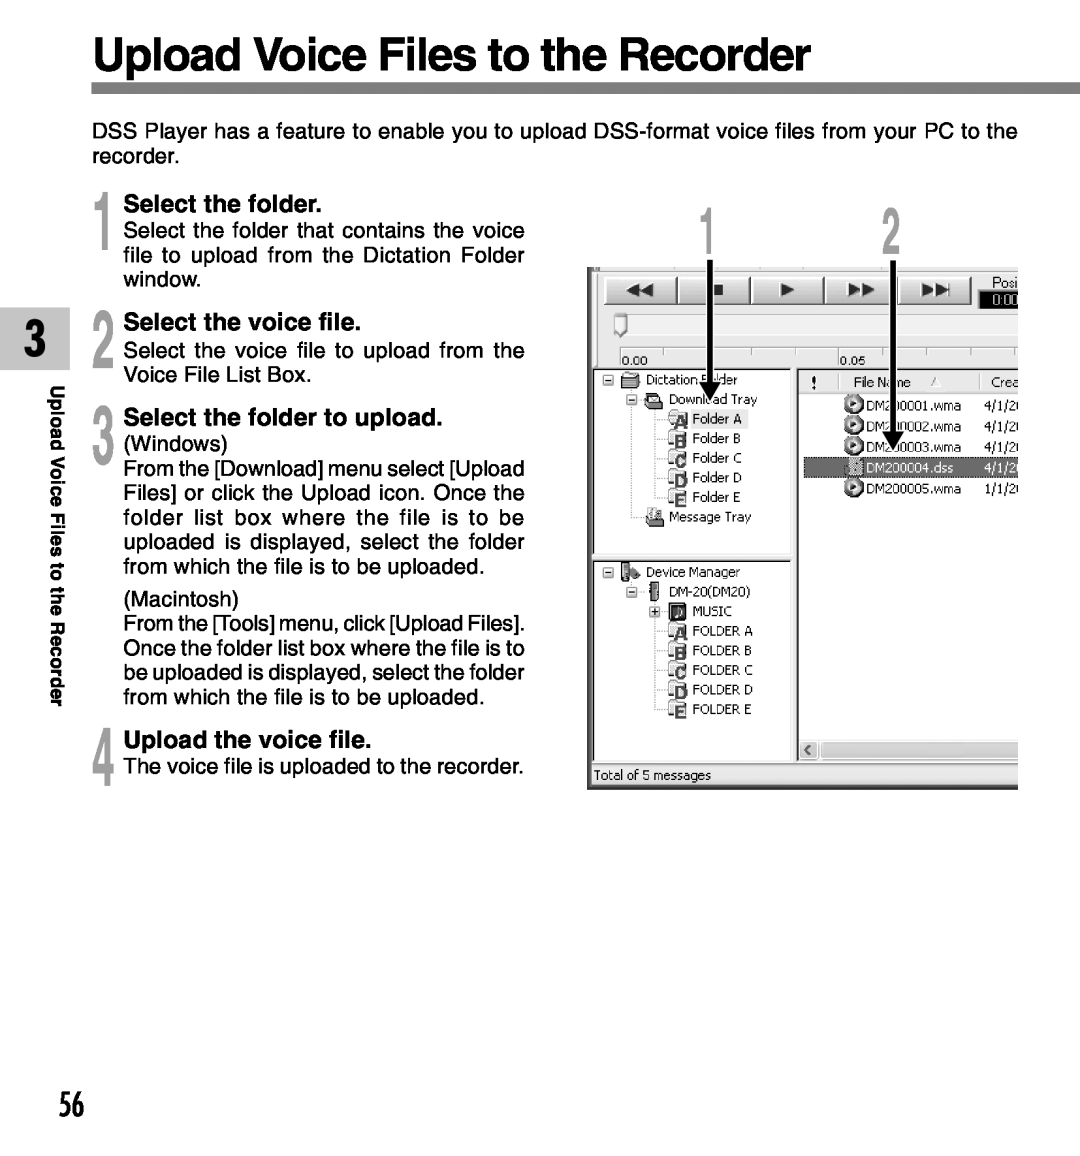 Olympus DM-10, DM-20 manual Upload Voice Files to the Recorder, Select the folder to upload, Upload the voice file 